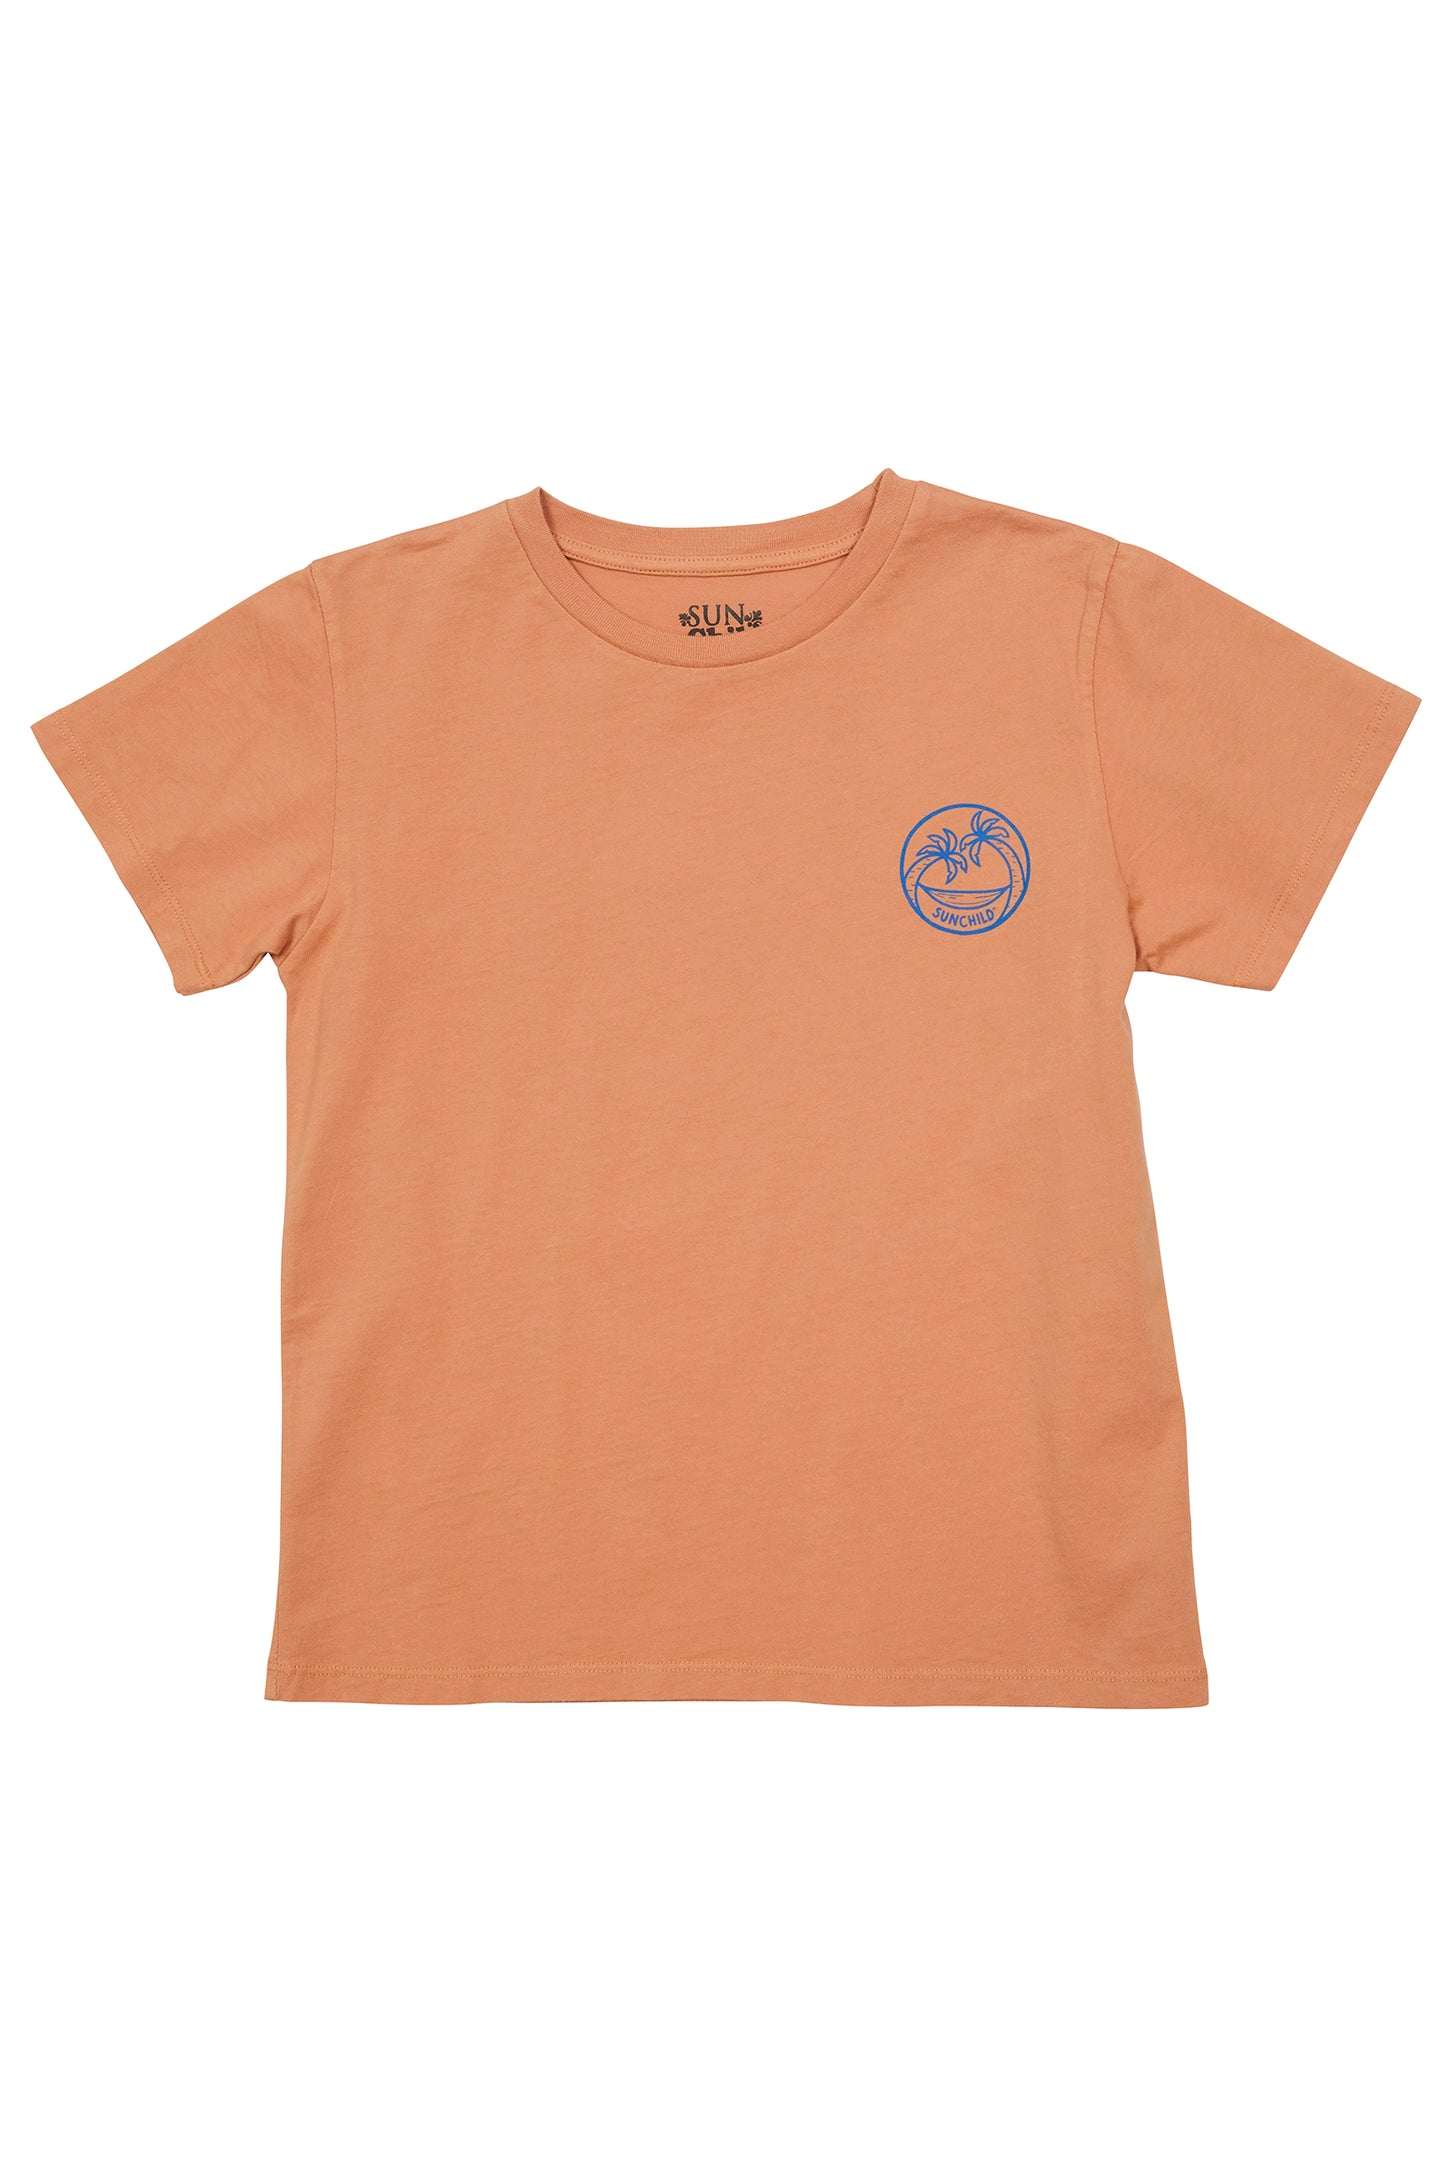 Orange t-shirt with Sunchild logo no the right side pocket in blue